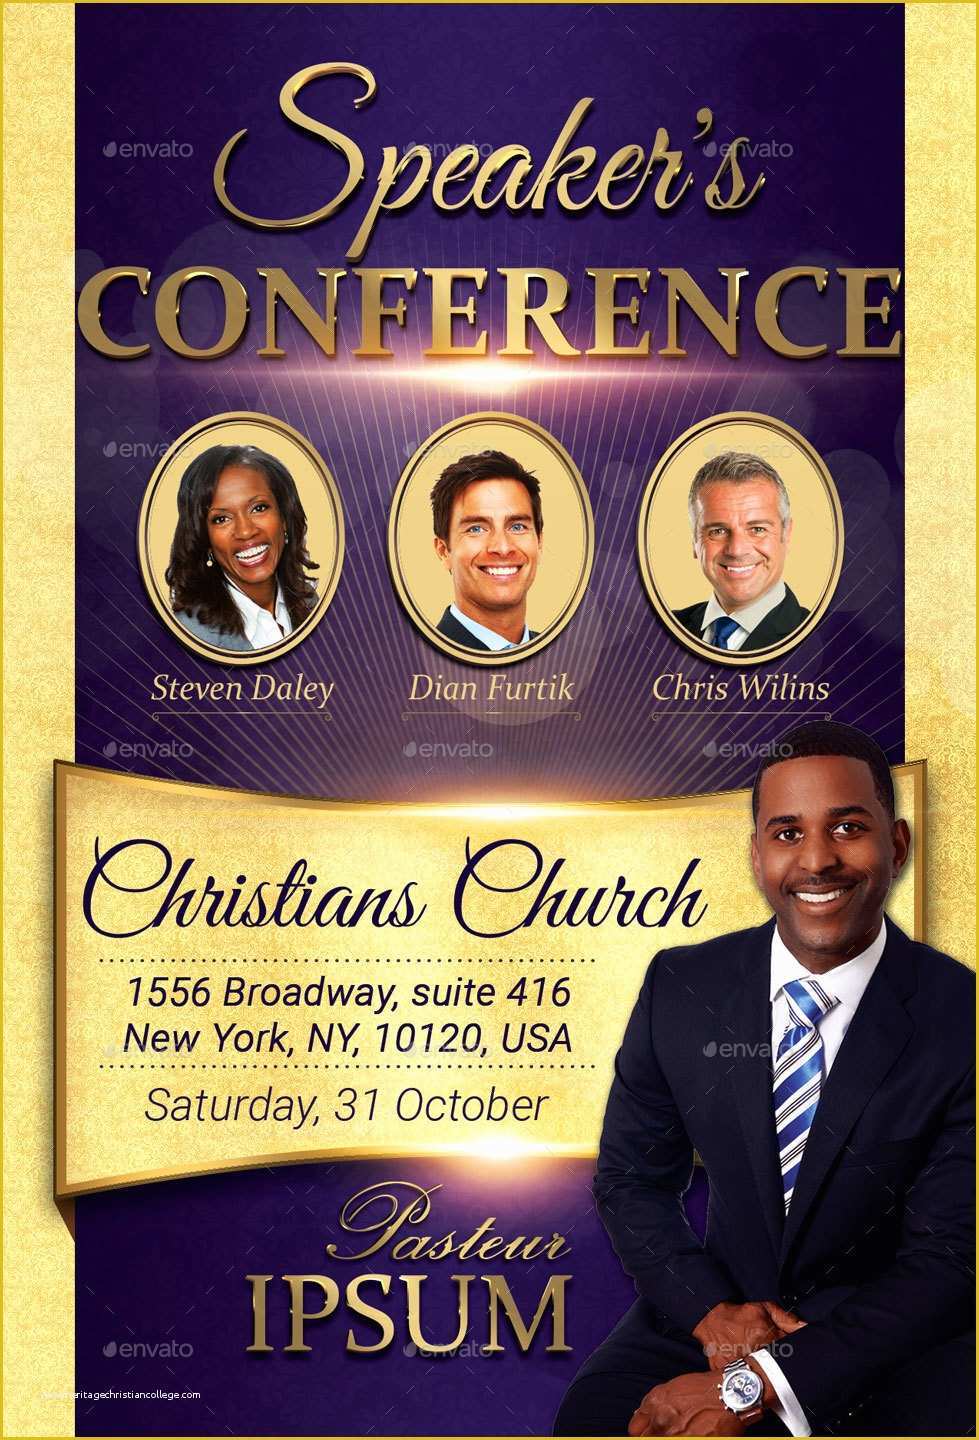 Free Church Flyer Templates Photoshop Of Speaker S Conference Church Flyer by Oloreon